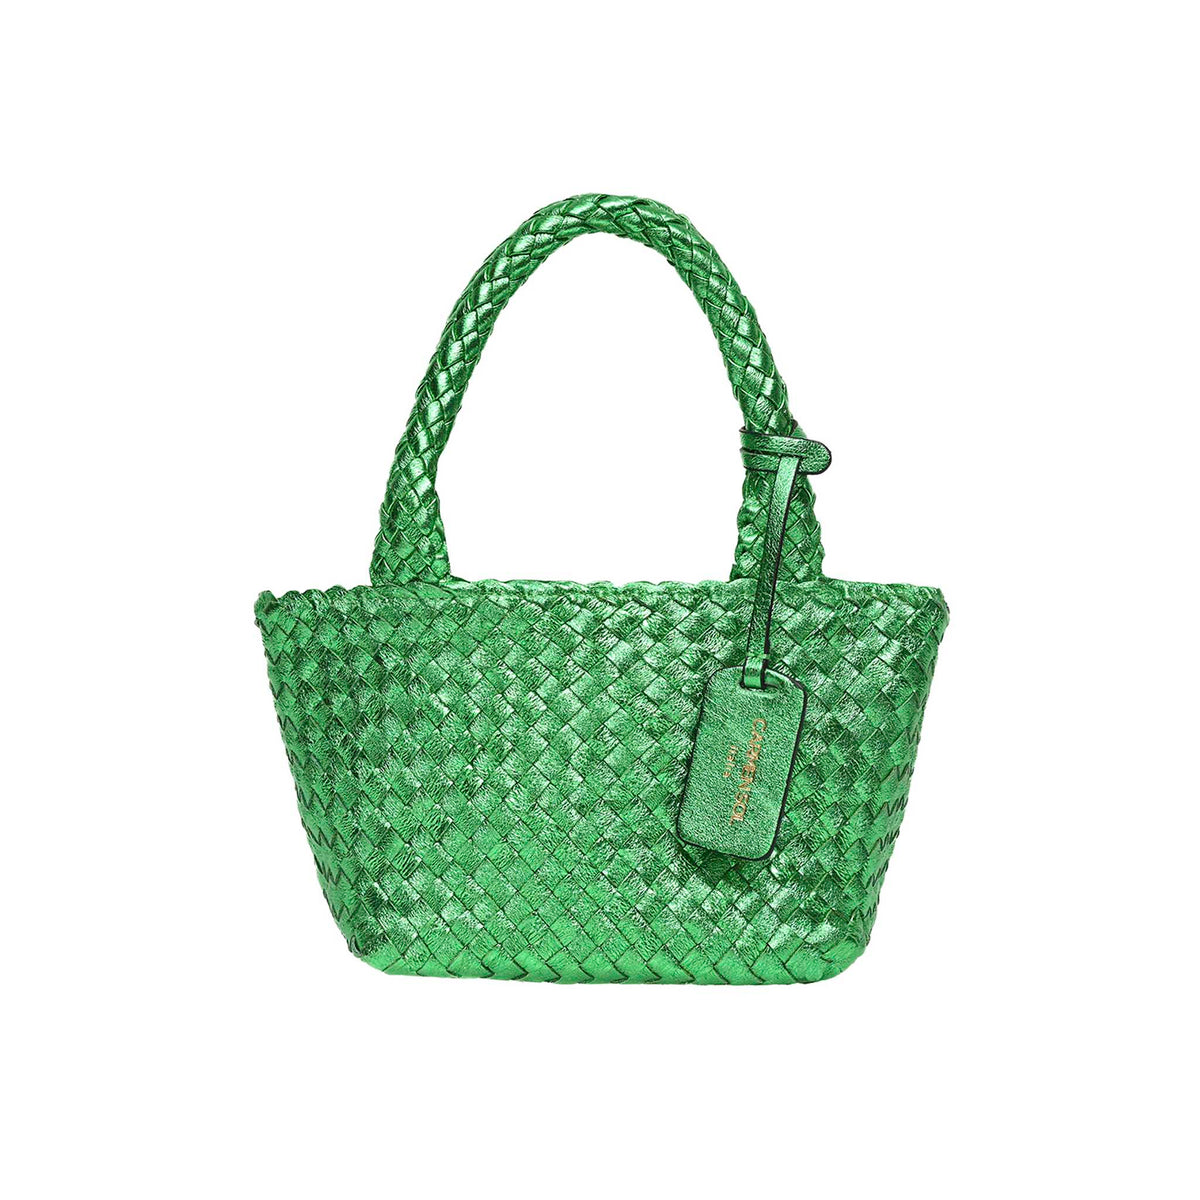 Green mini tote bag, leather bag from mini Carmen Sol. Material: hand-woven leather made in Italy.